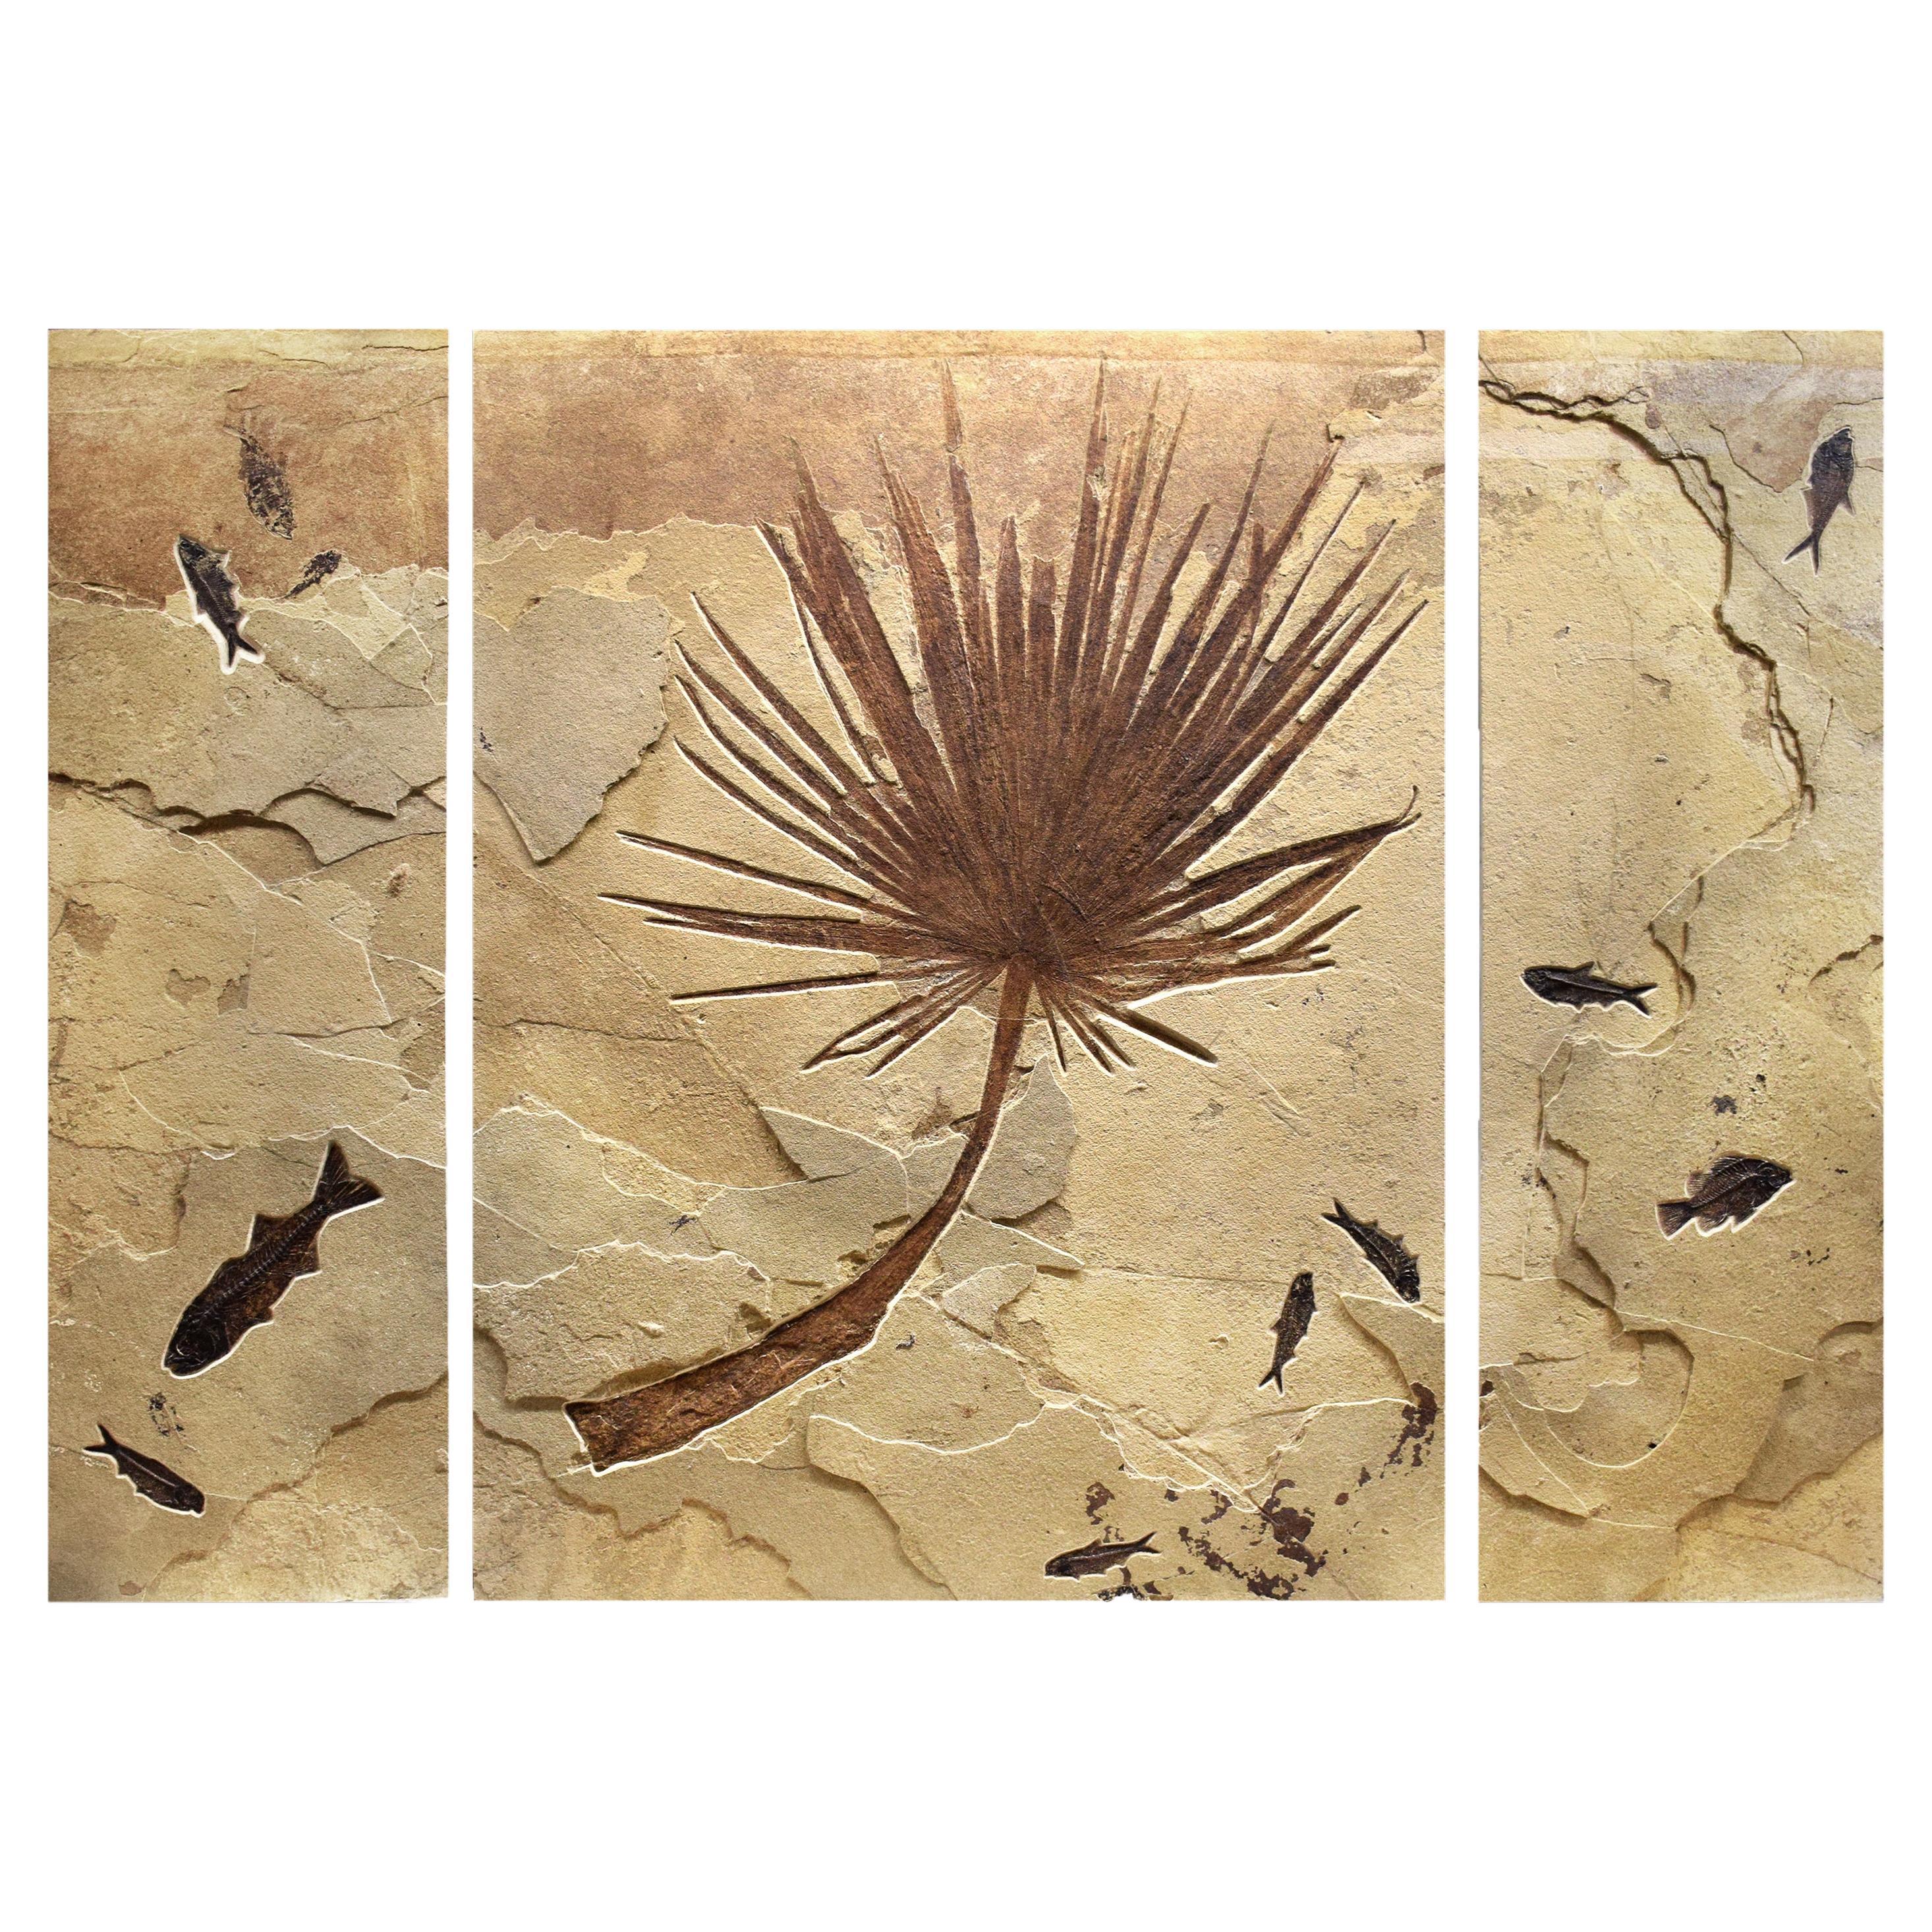 50 Million Year Old Fossil Palm & Fish Triptych, Green River Formation, Wyoming